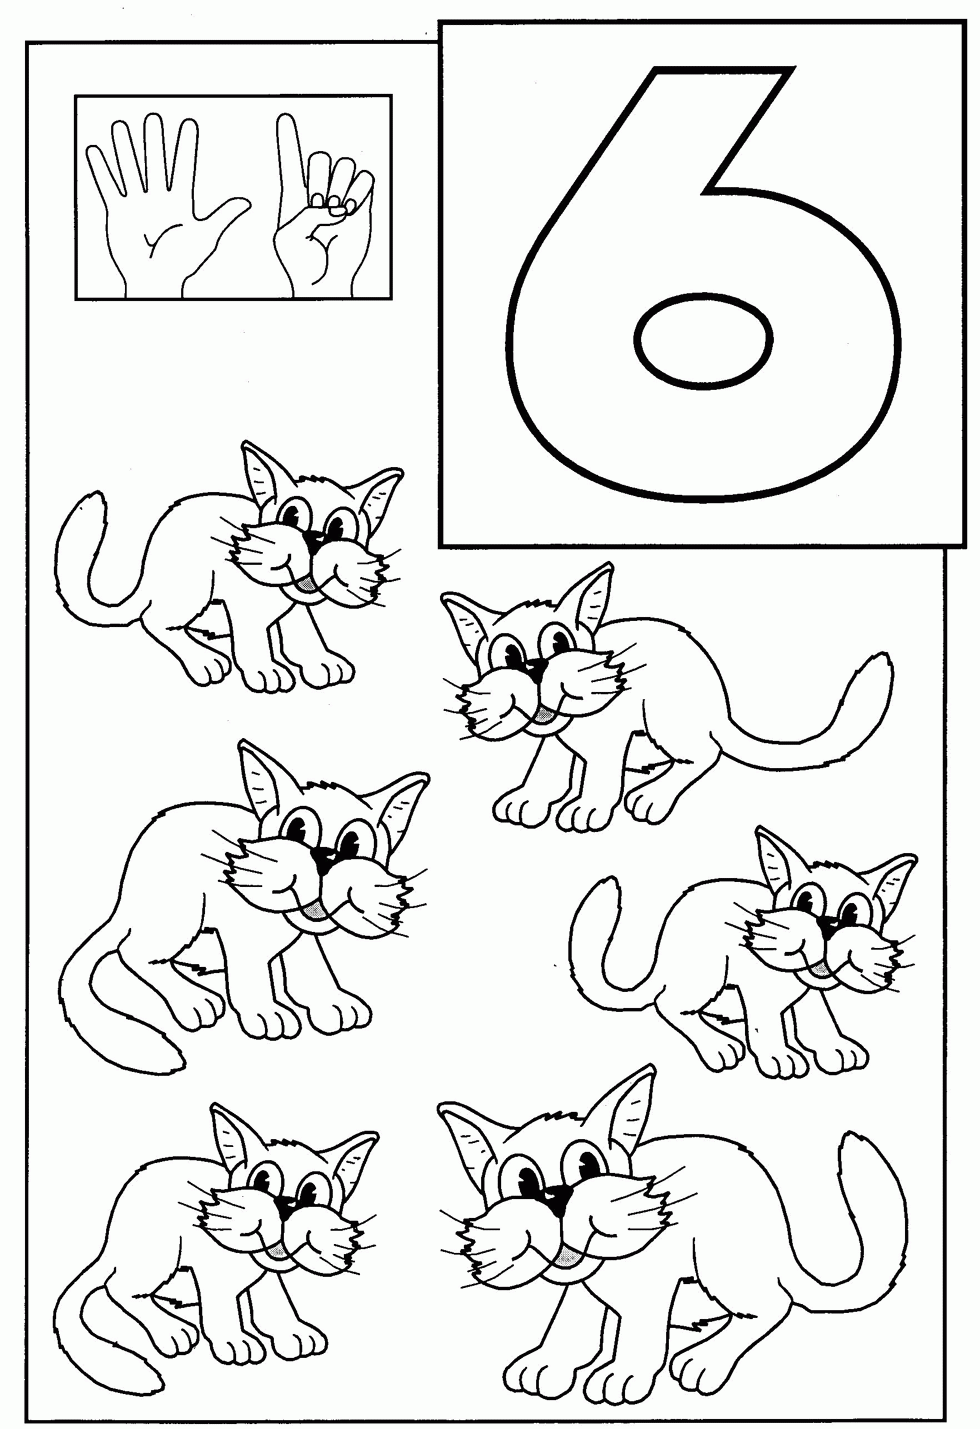 311 Simple Coloring Pages Number 6 with disney character